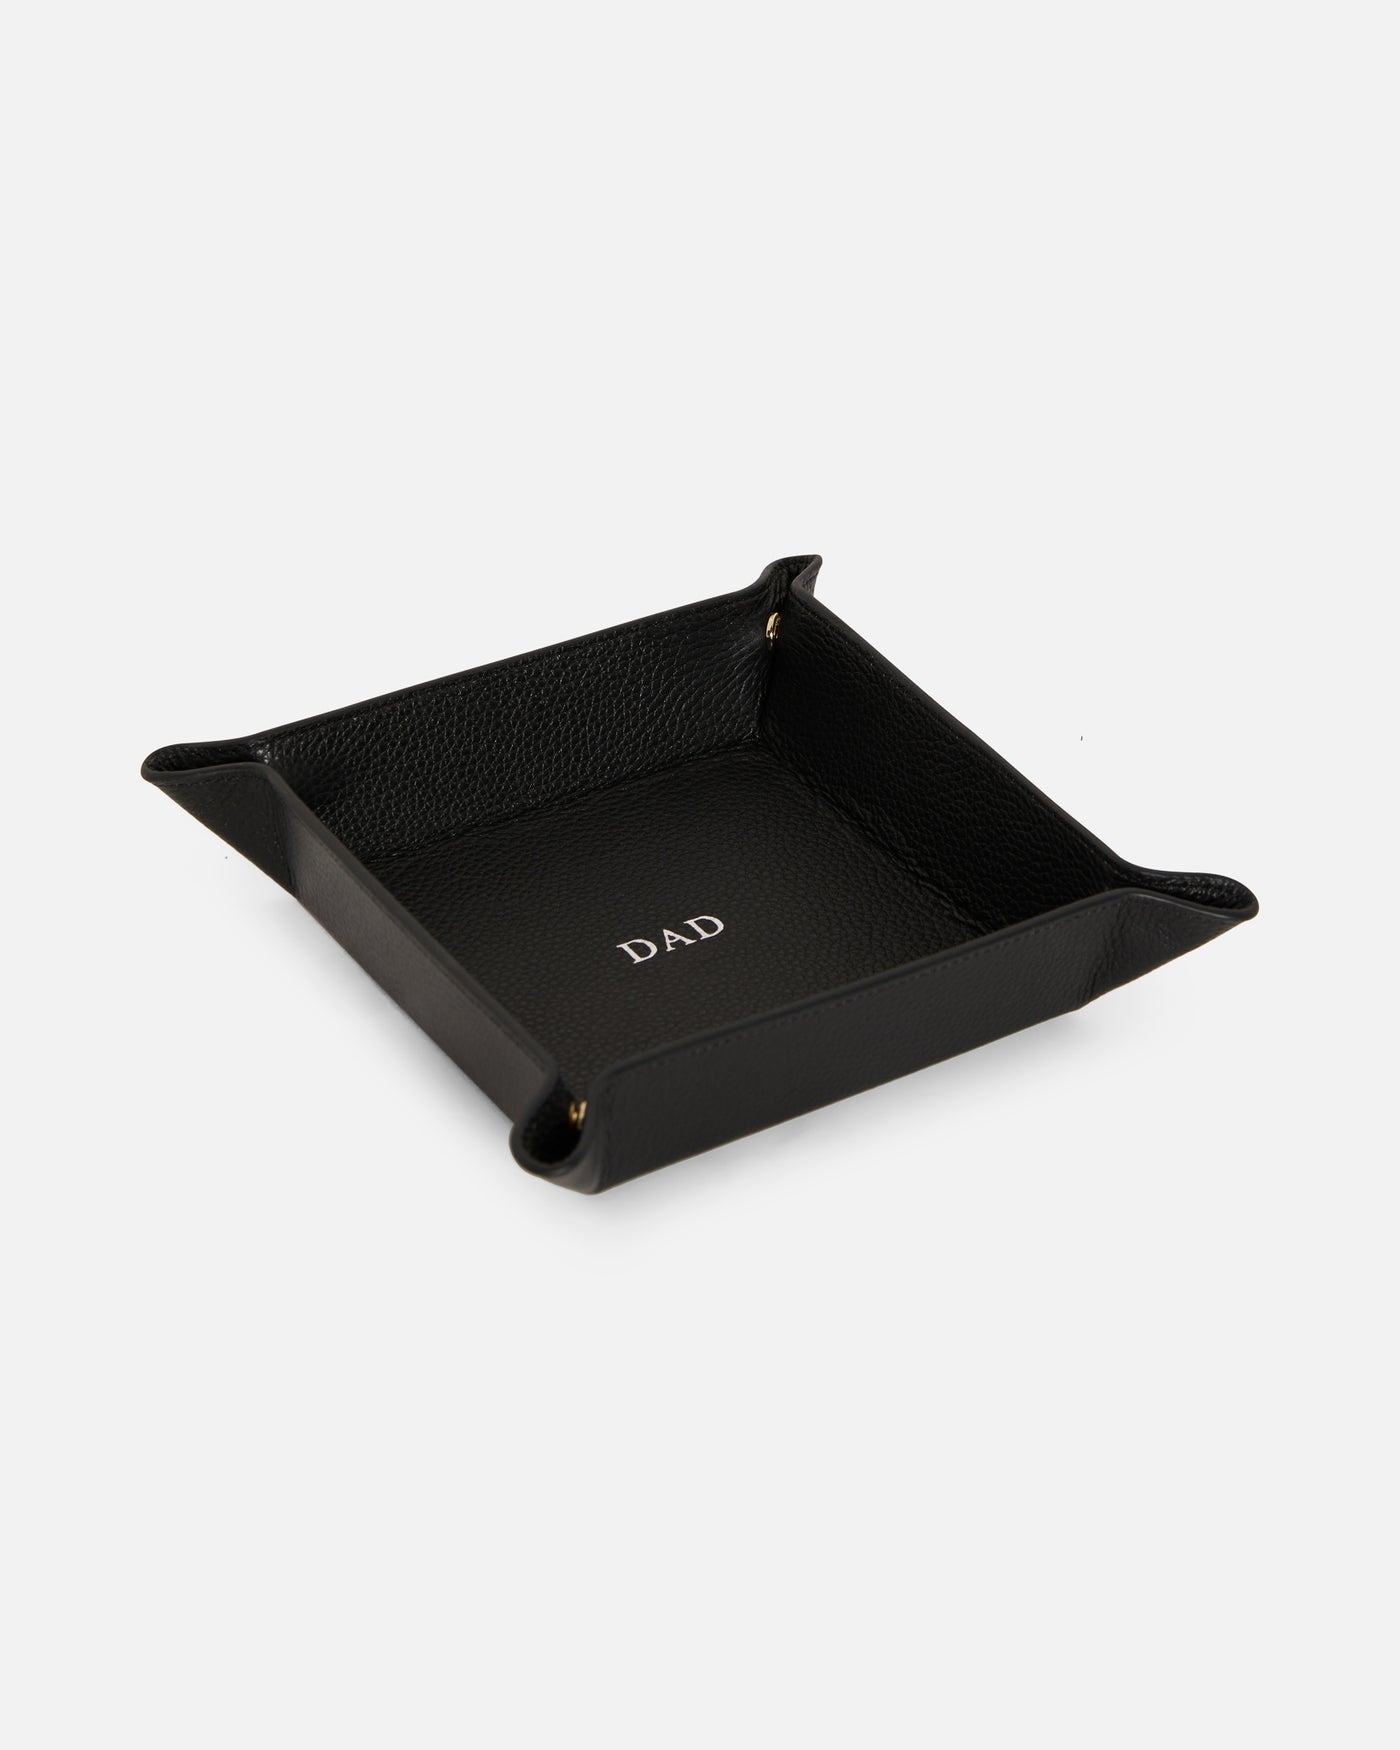 Black valet tray with gold embossed font